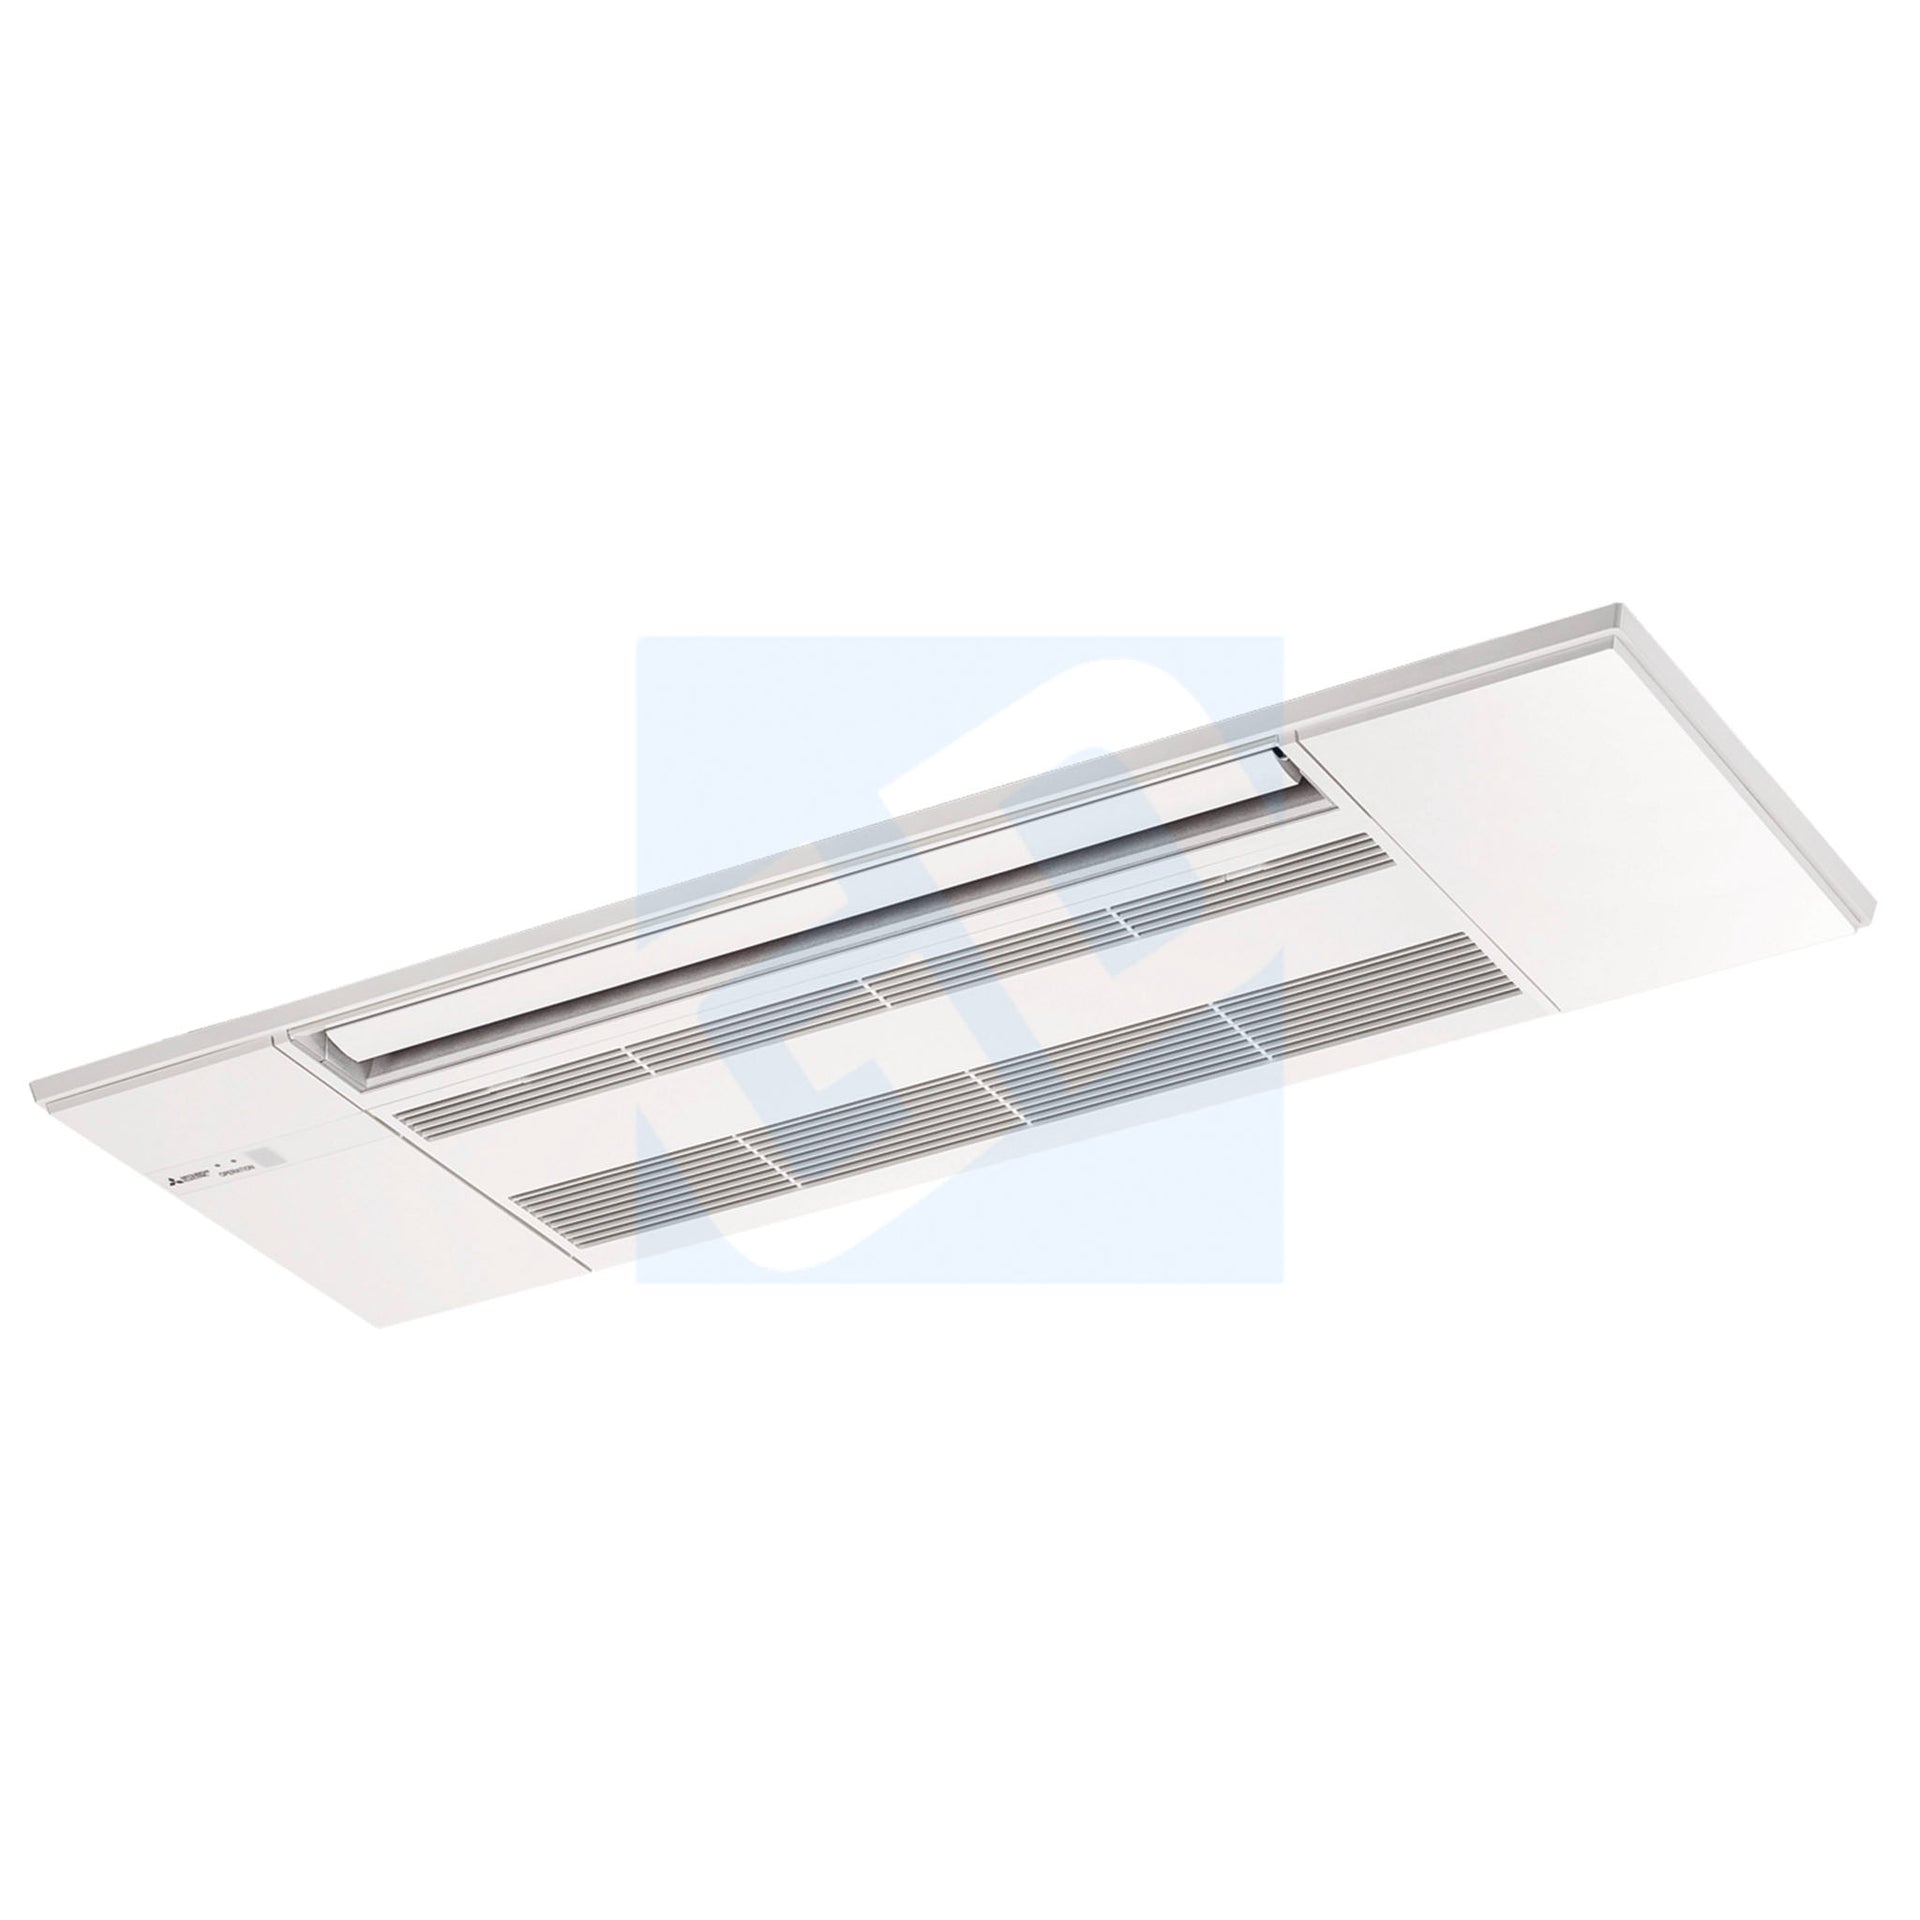 Mitsubishi Mlp One Way Ceiling Cassette